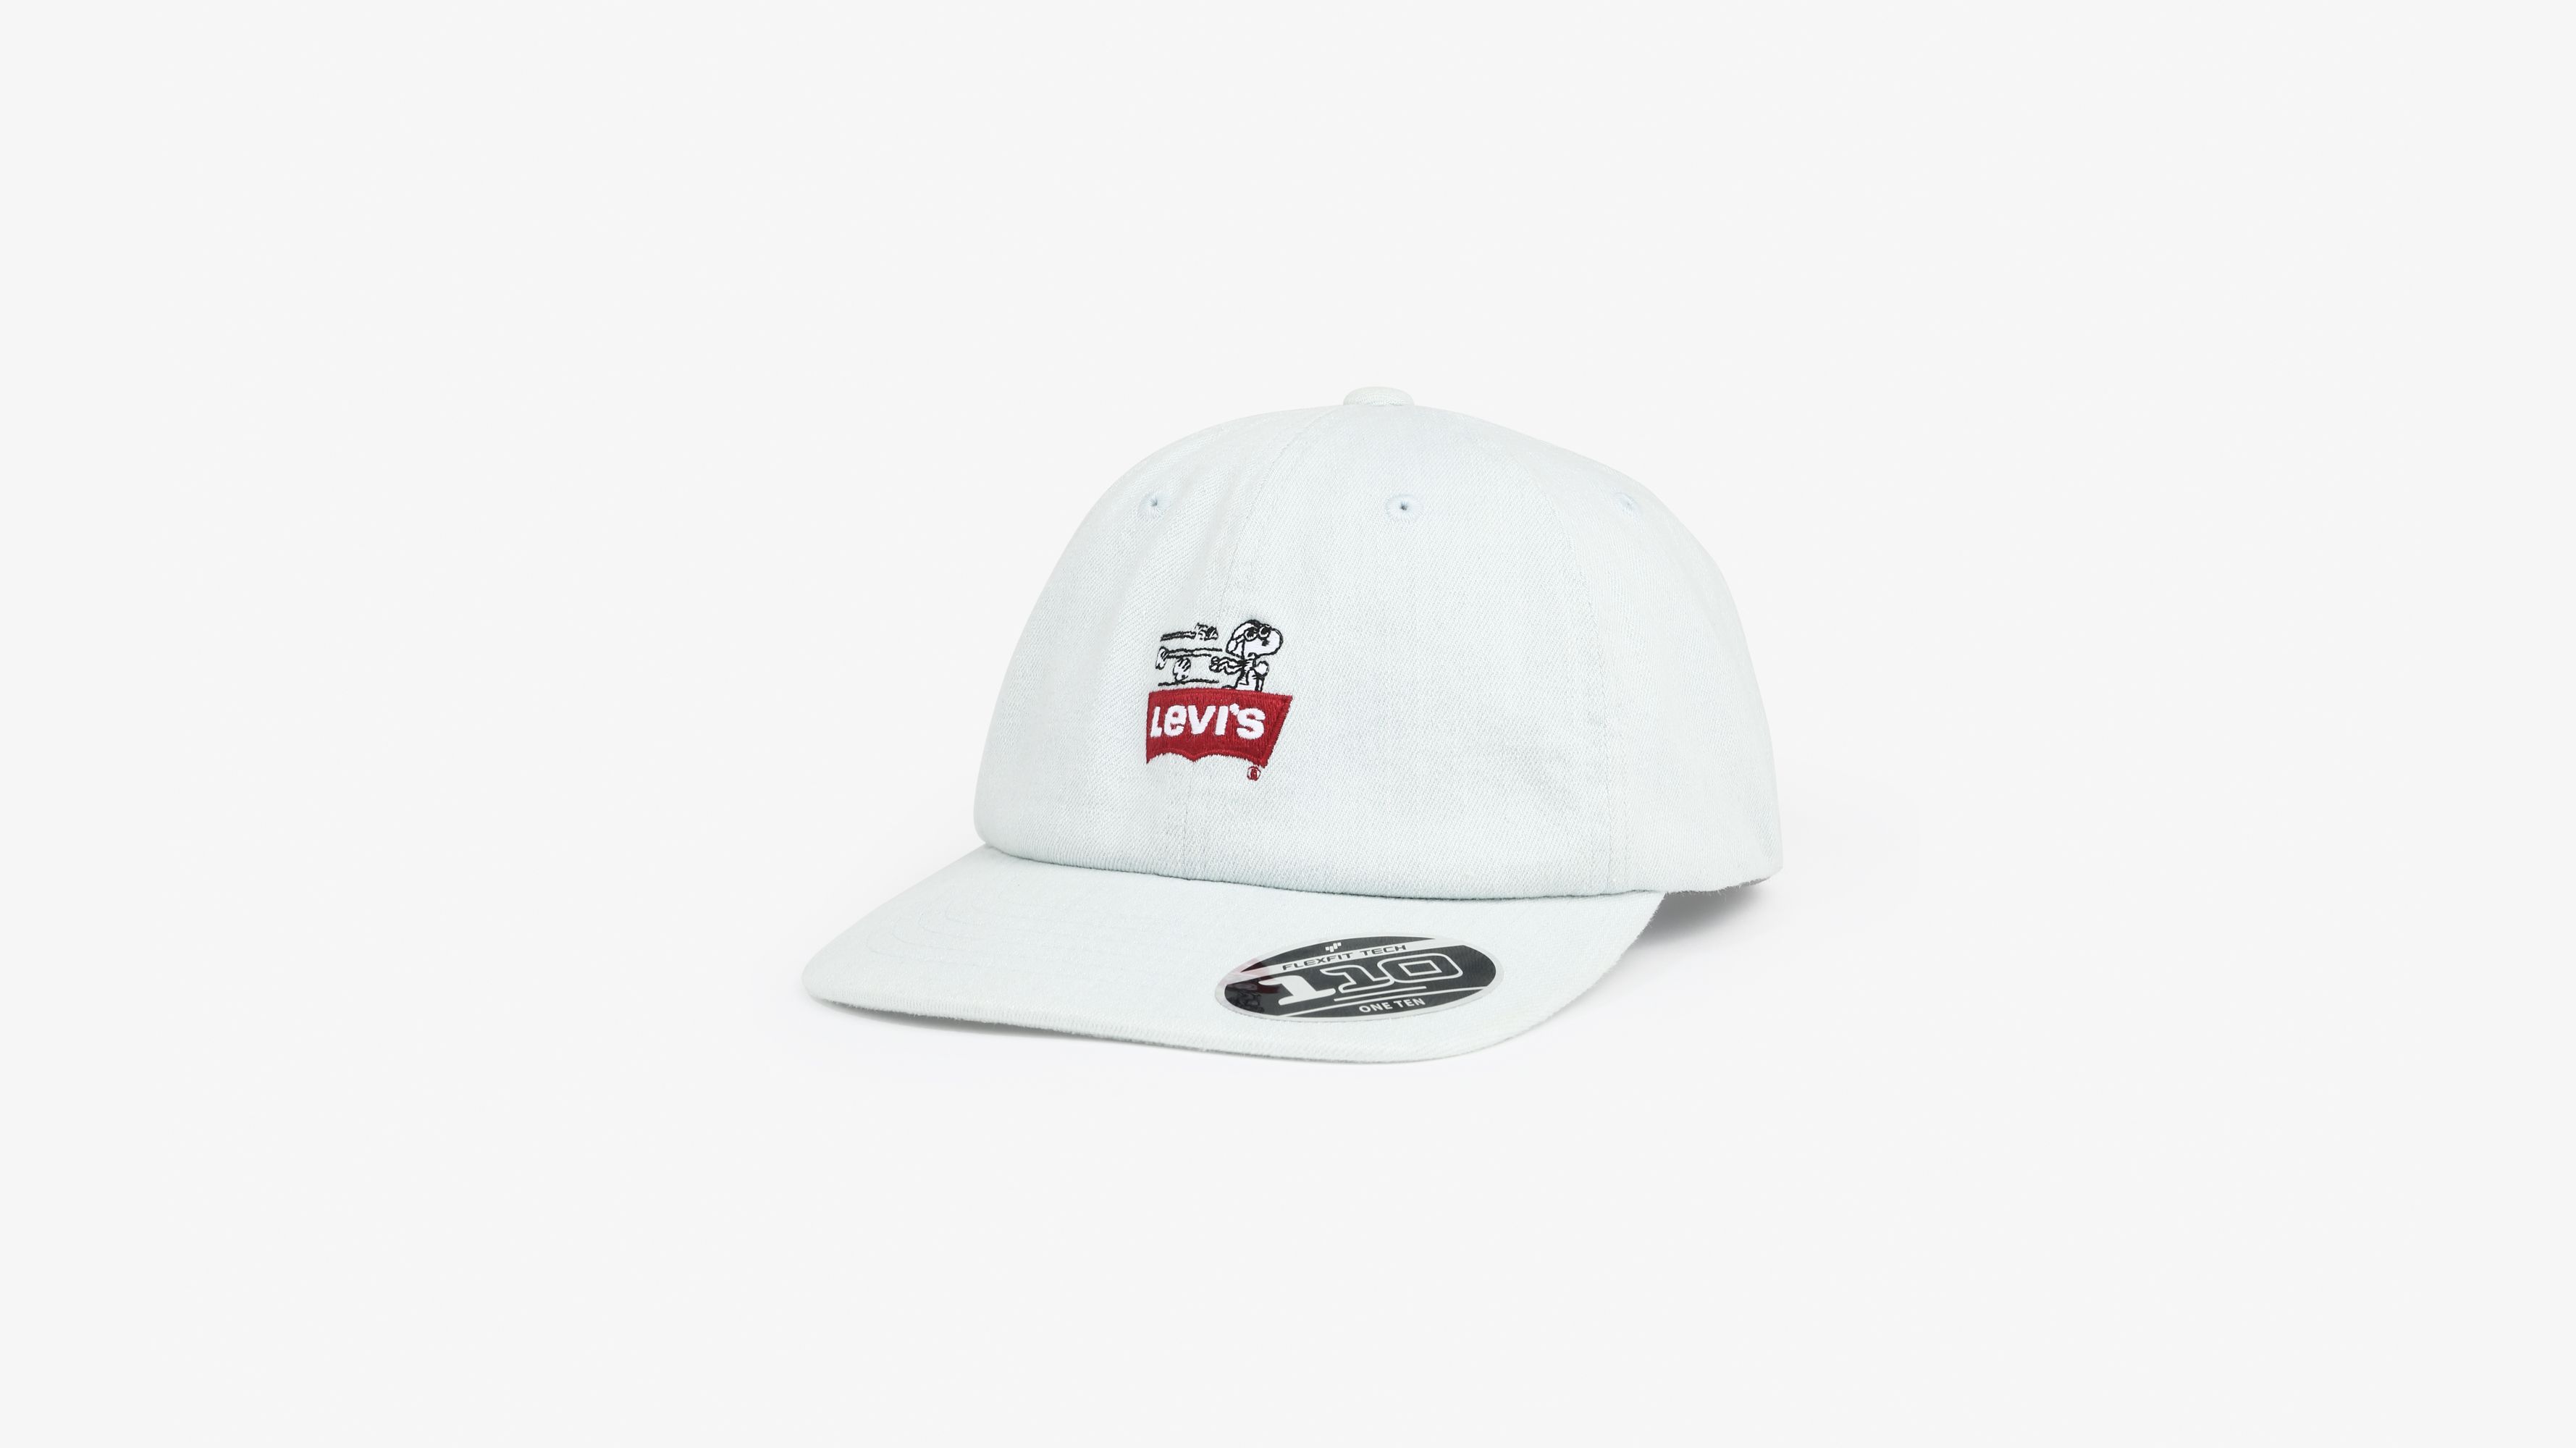 levis snoopy hat